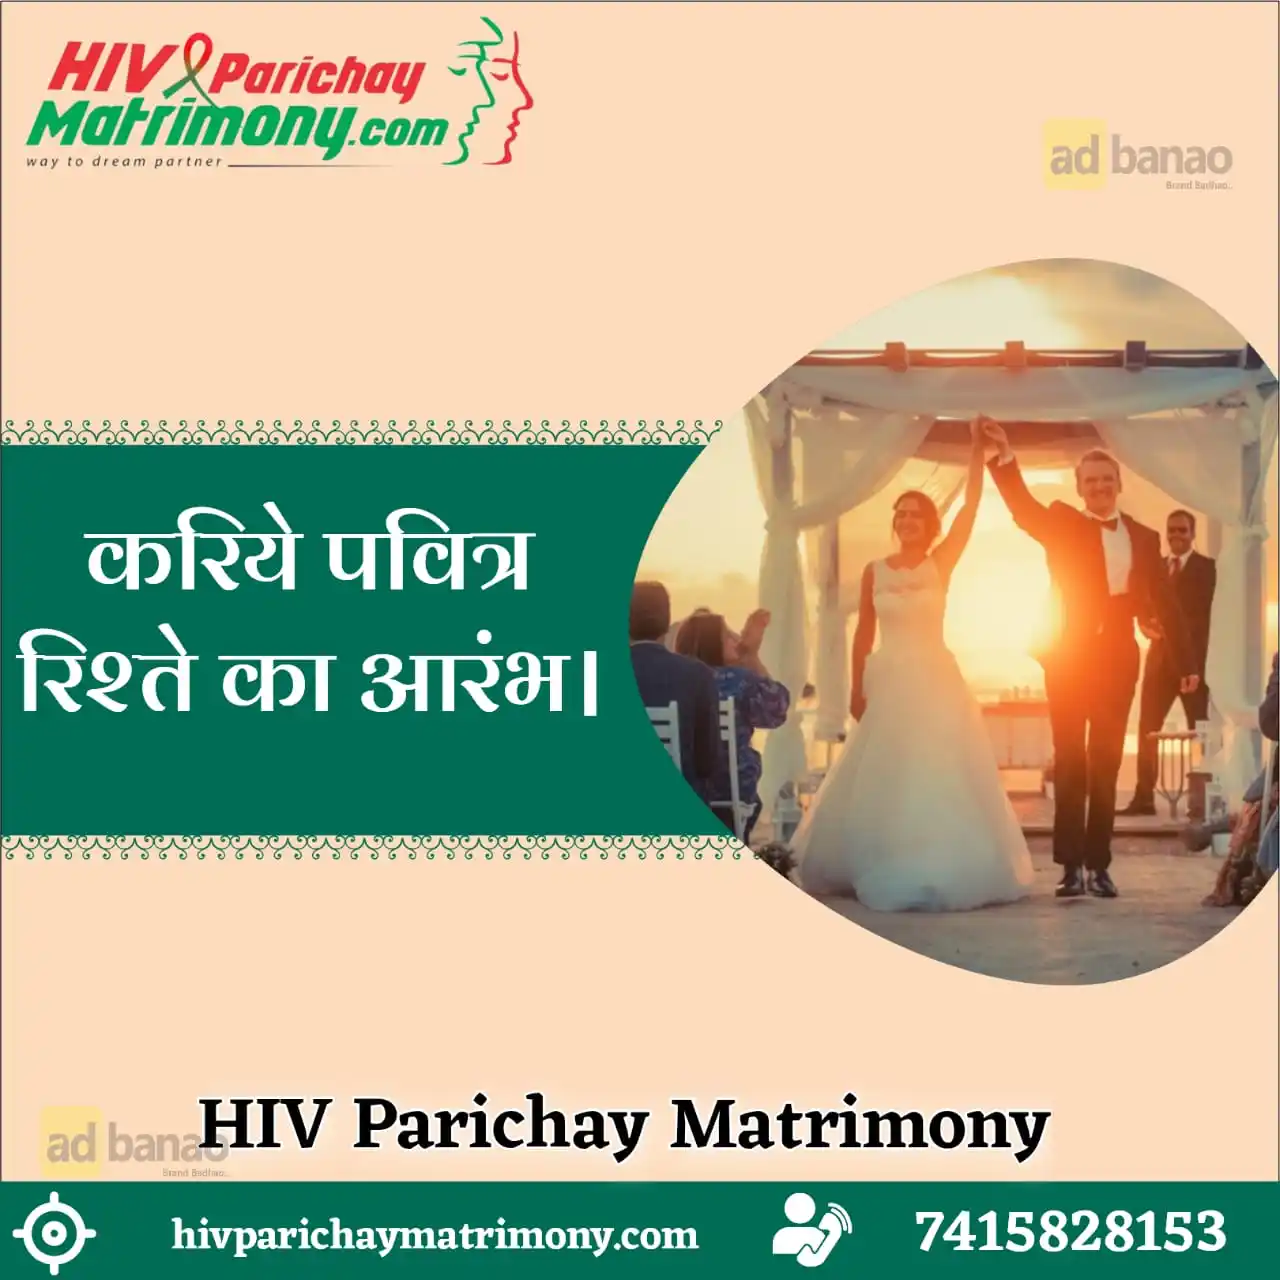 Which is best HIV Divorced matrimony?